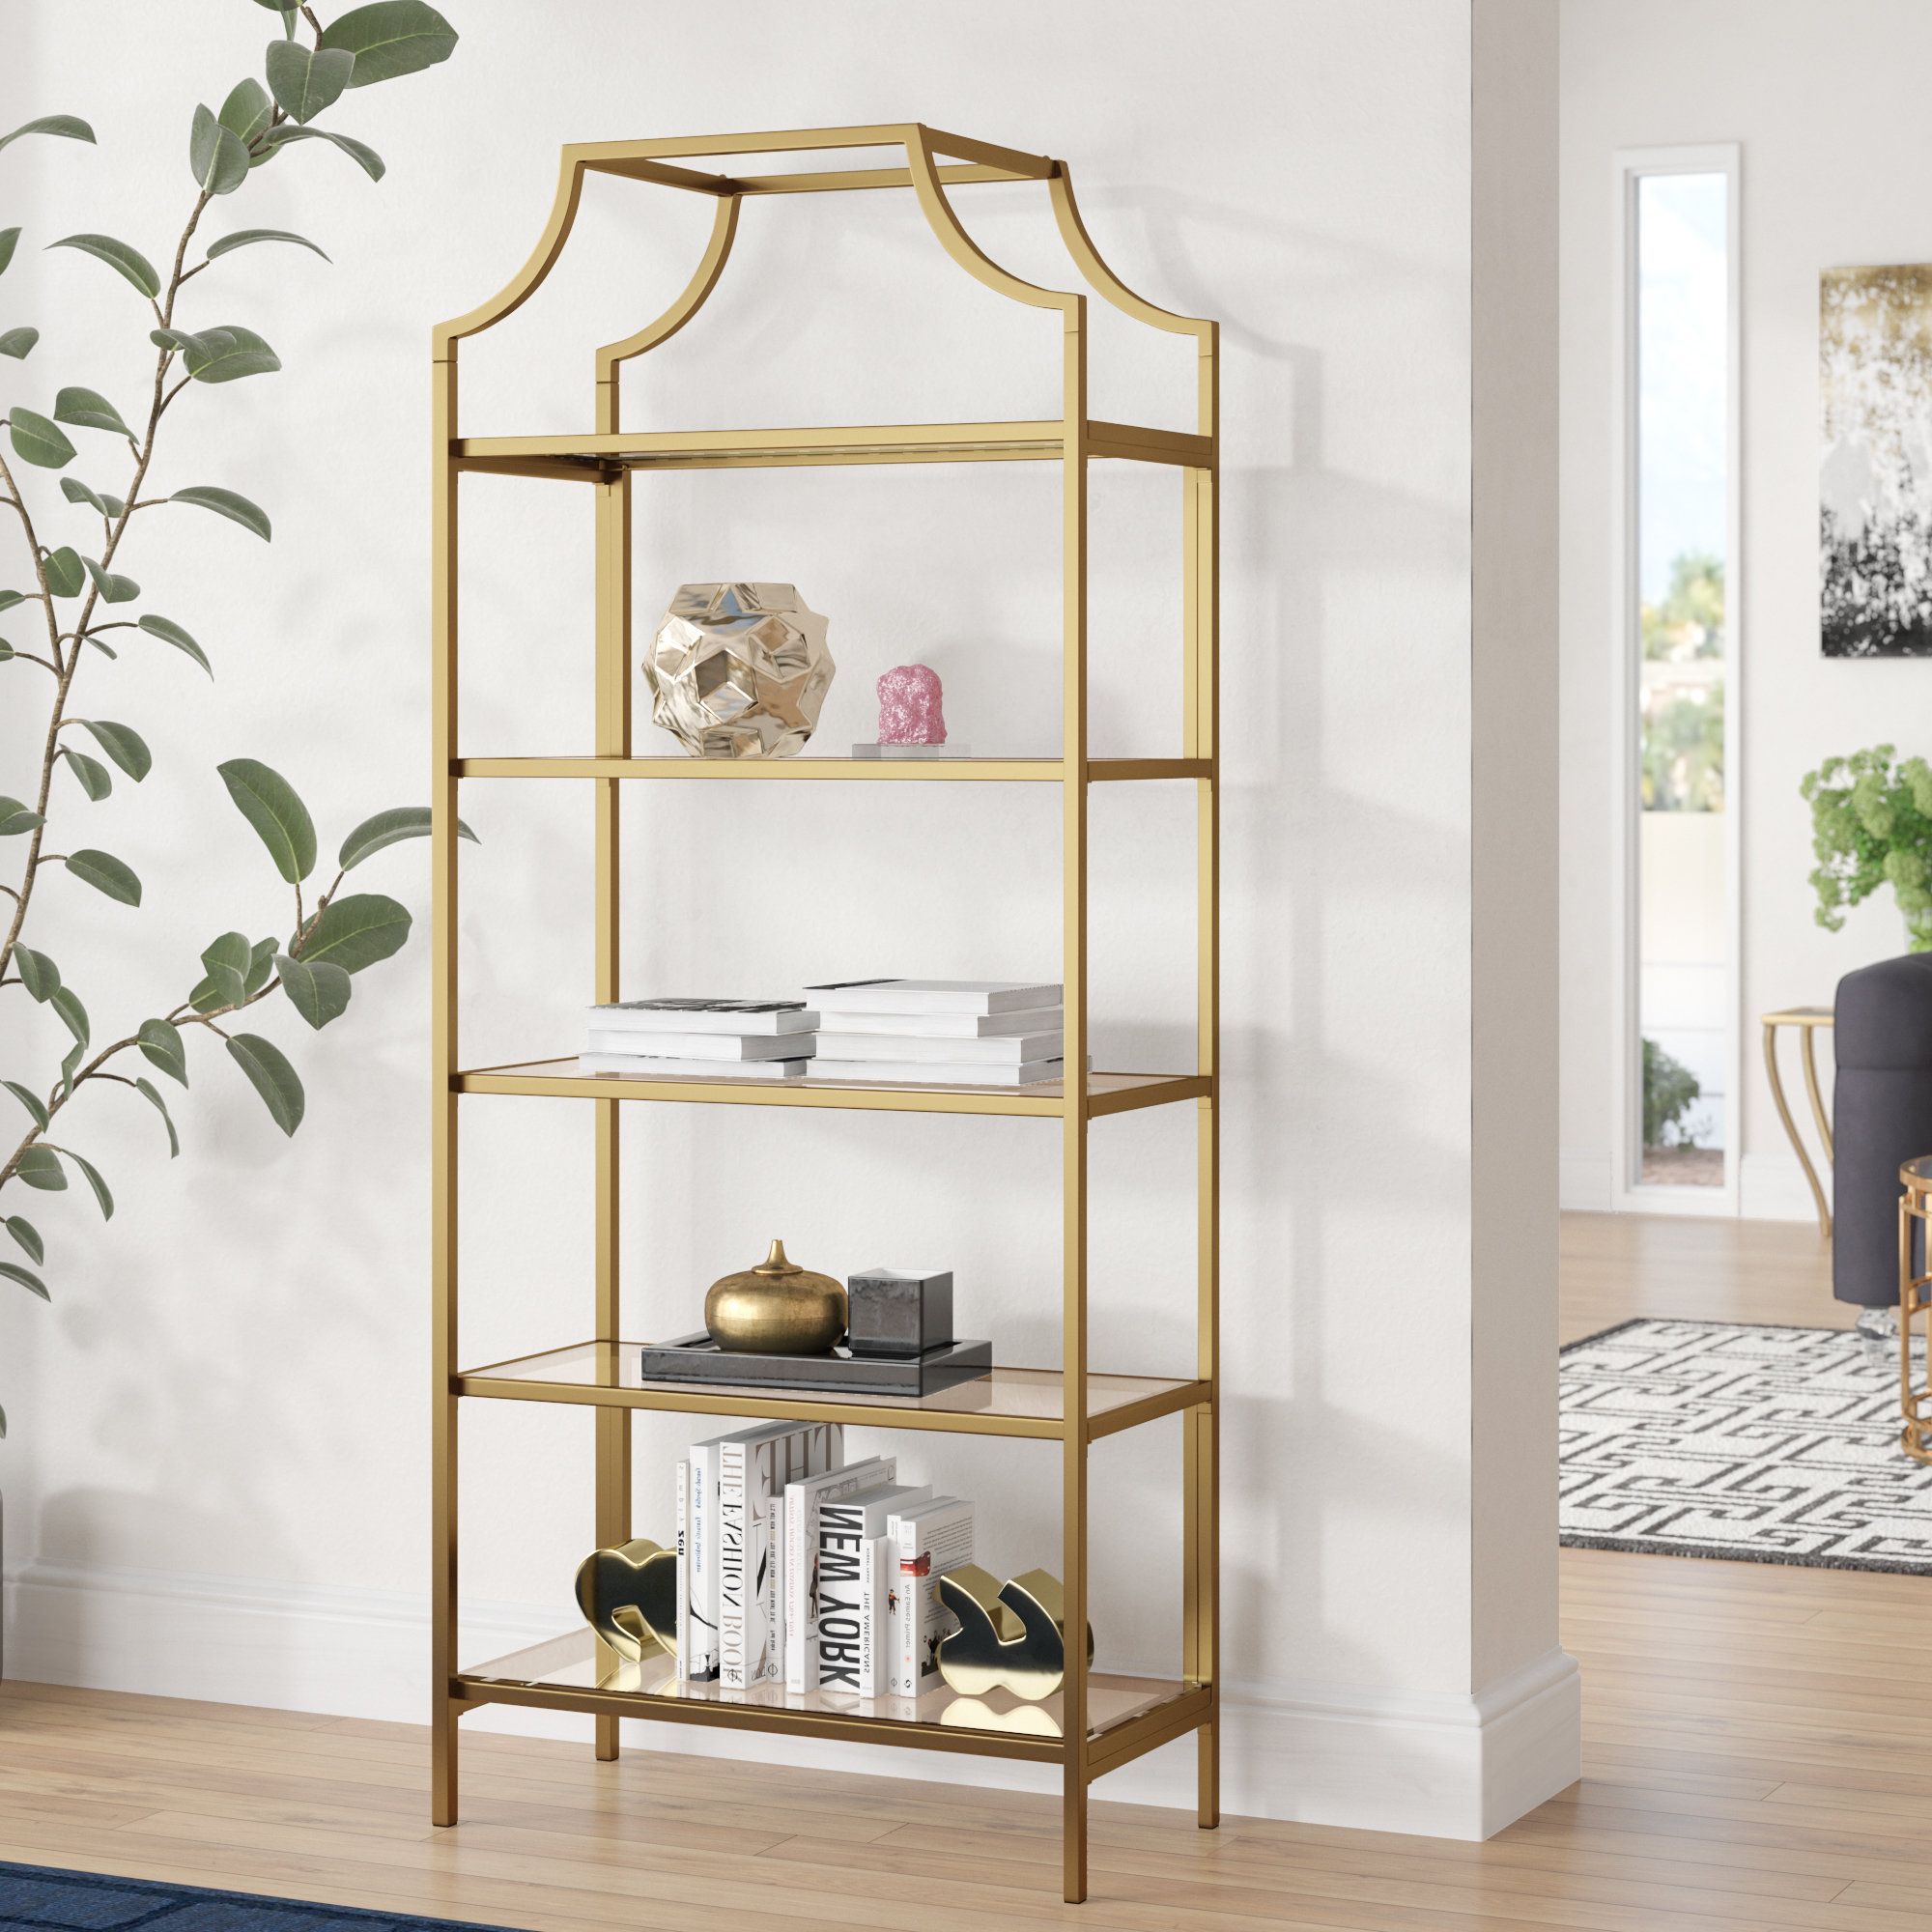 Mistana Damon Etagere Bookcase & Reviews (View 10 of 20)